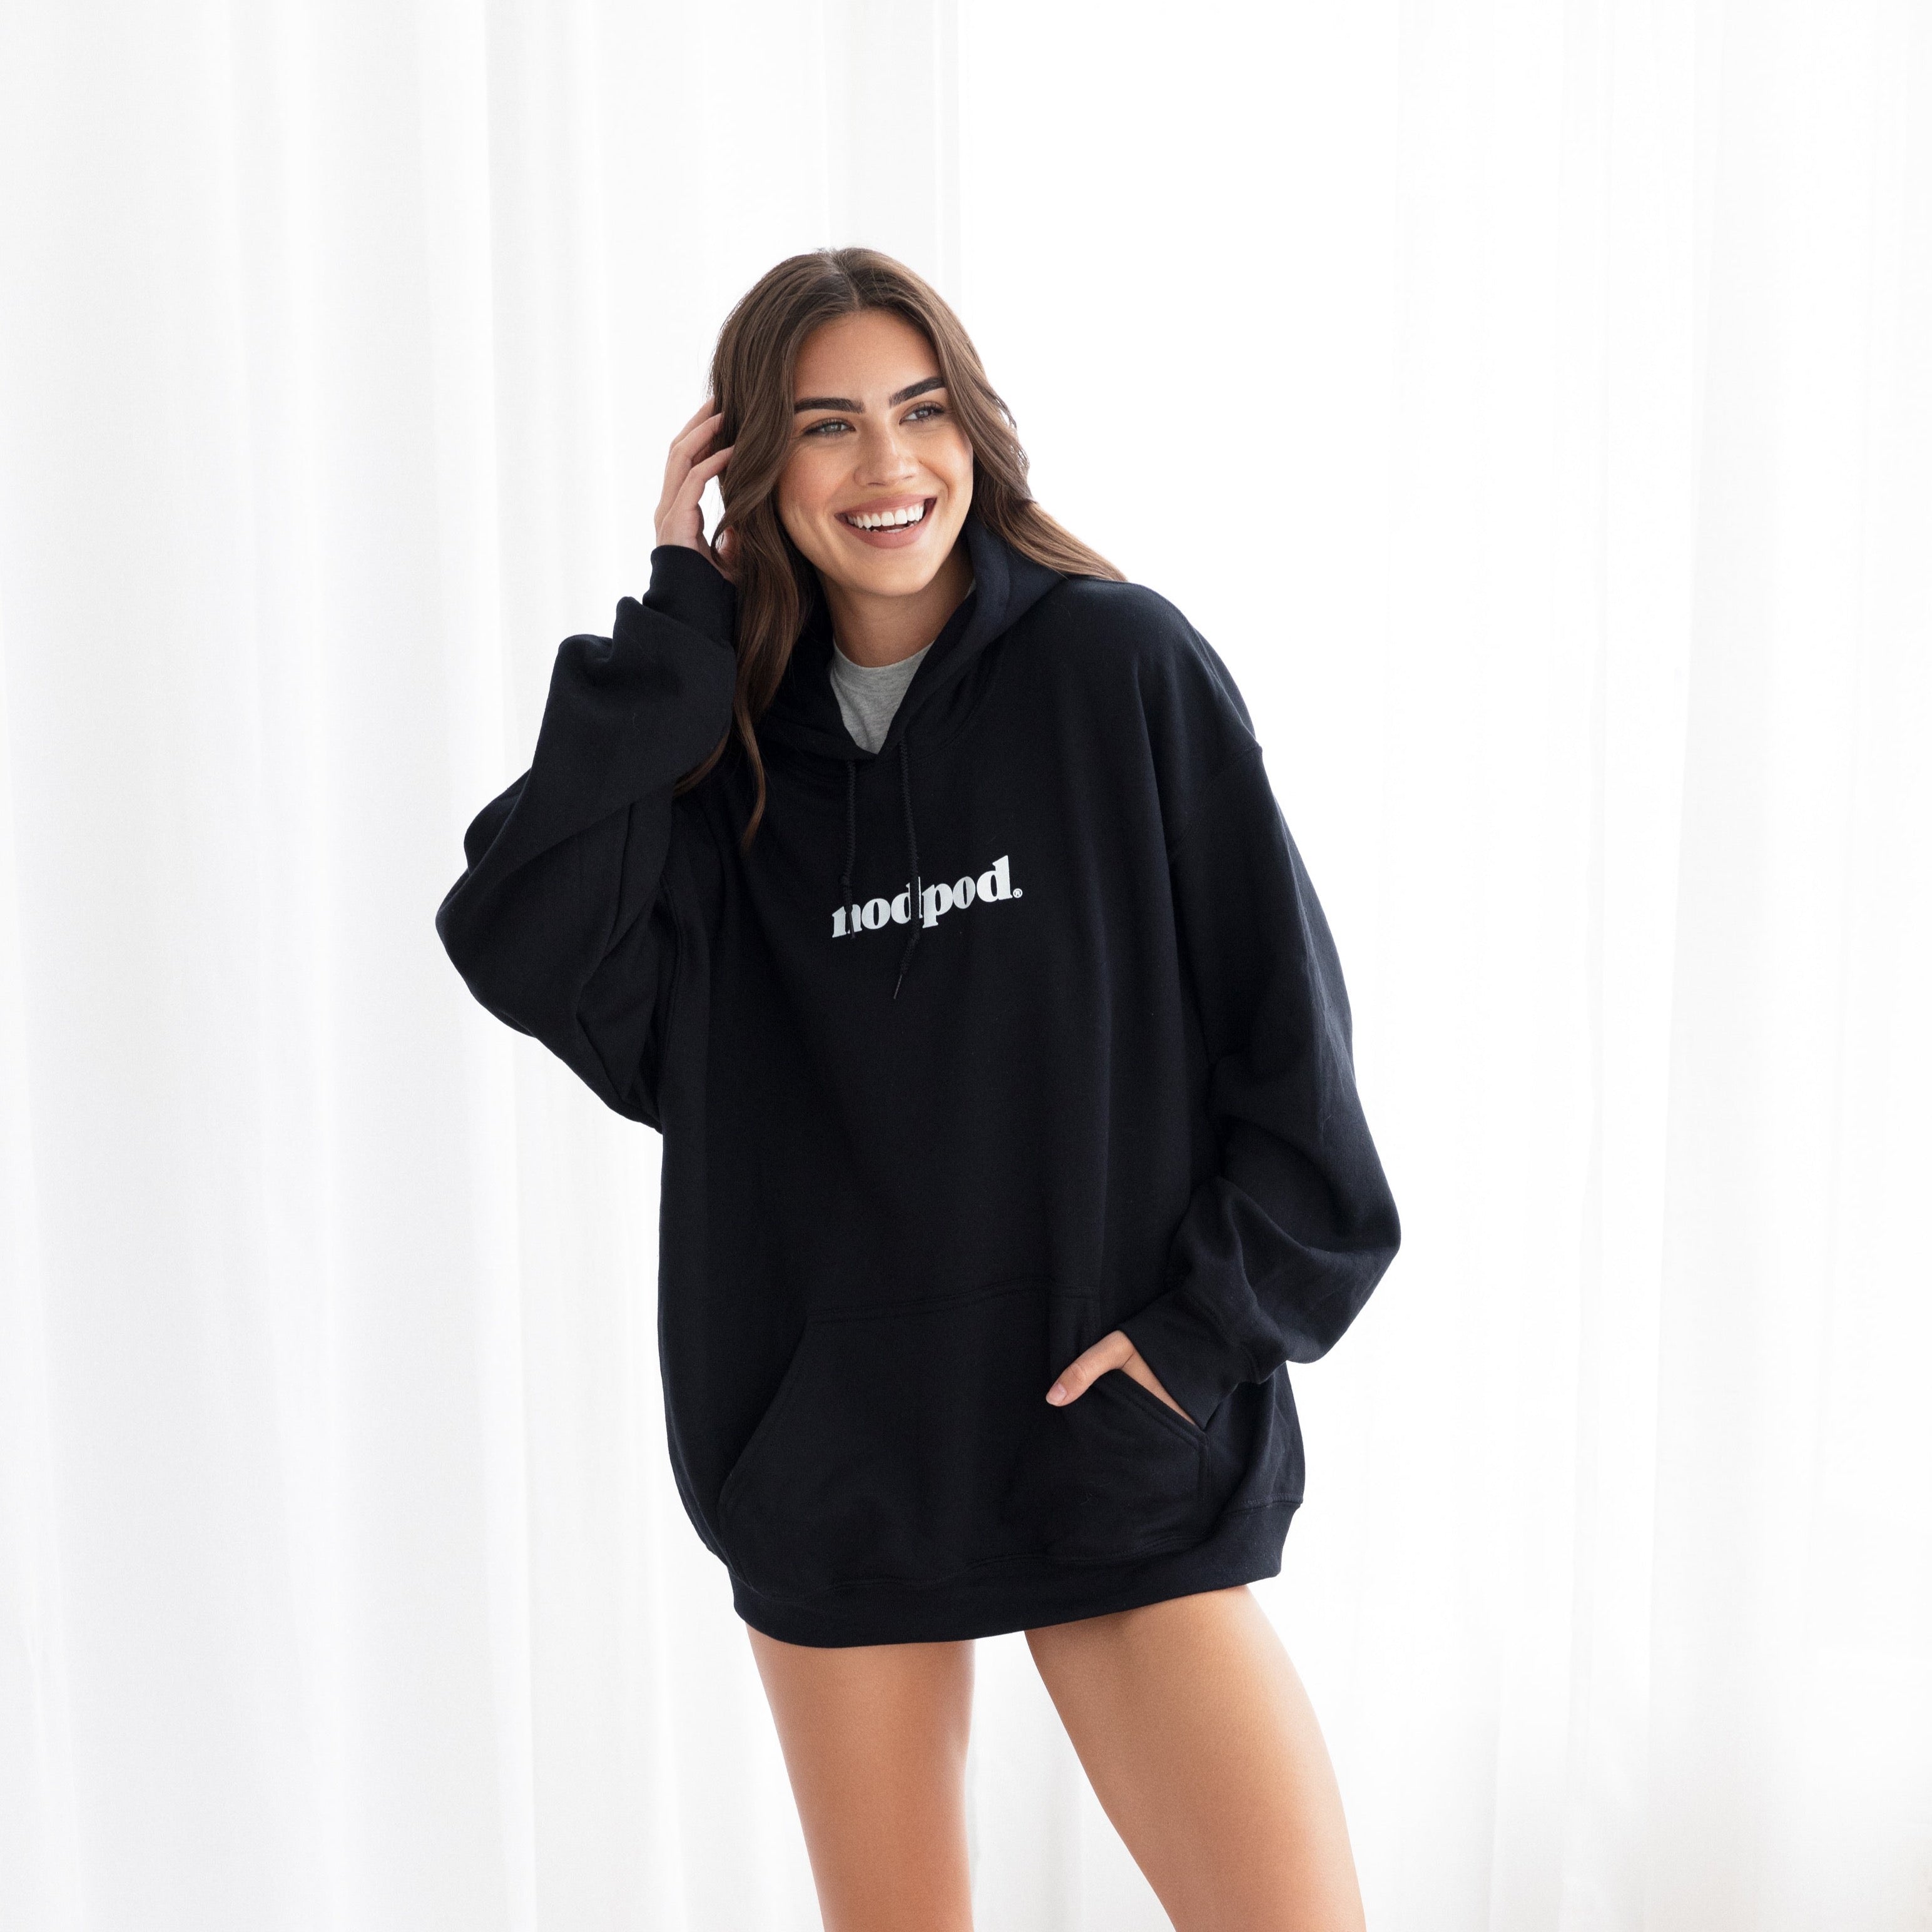 Nodpod is All You Need Hoodie